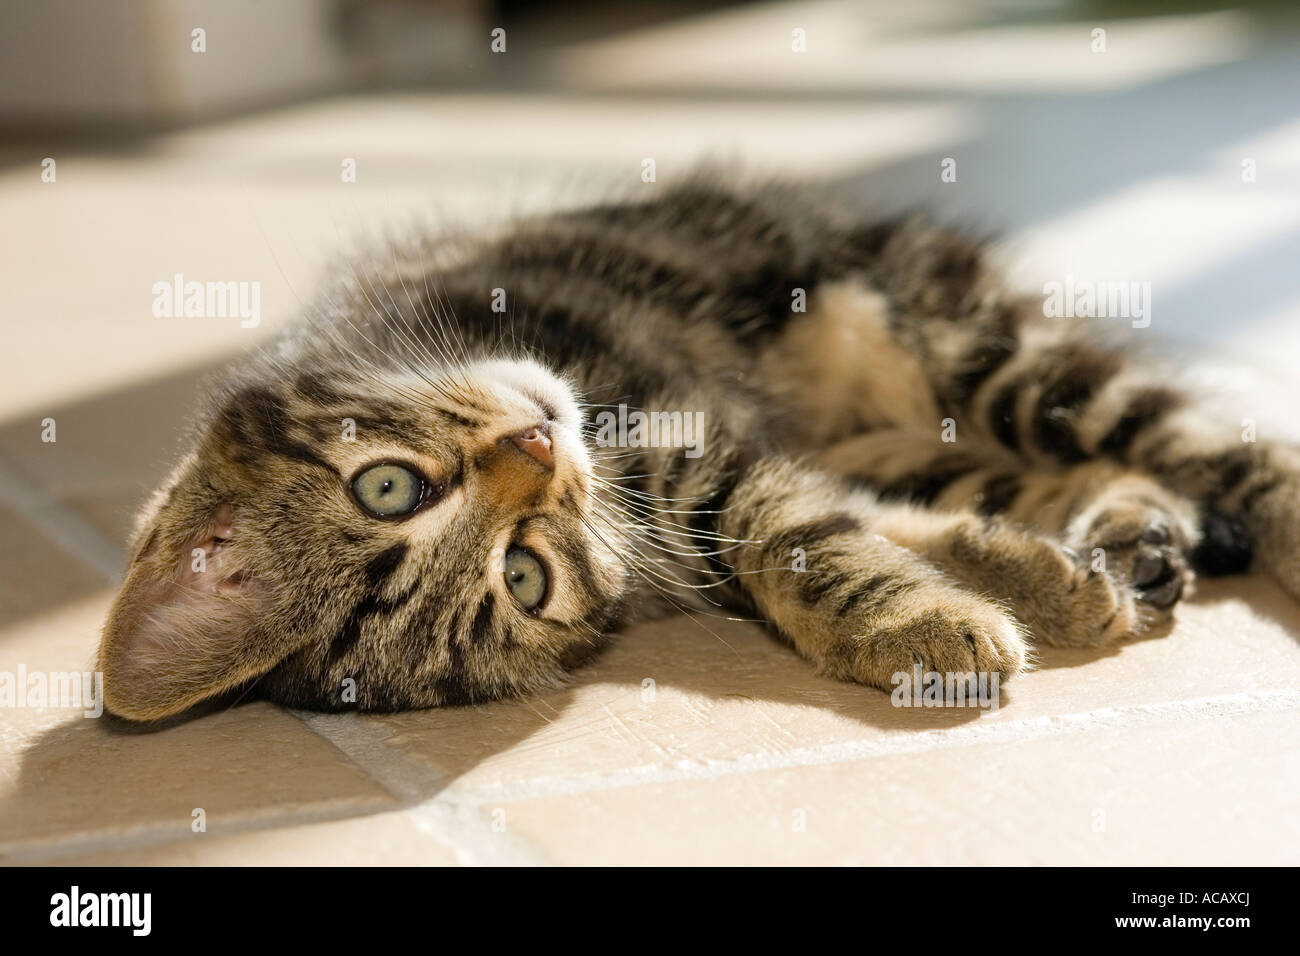 Young domestic cat rolling on floor Stock Photo